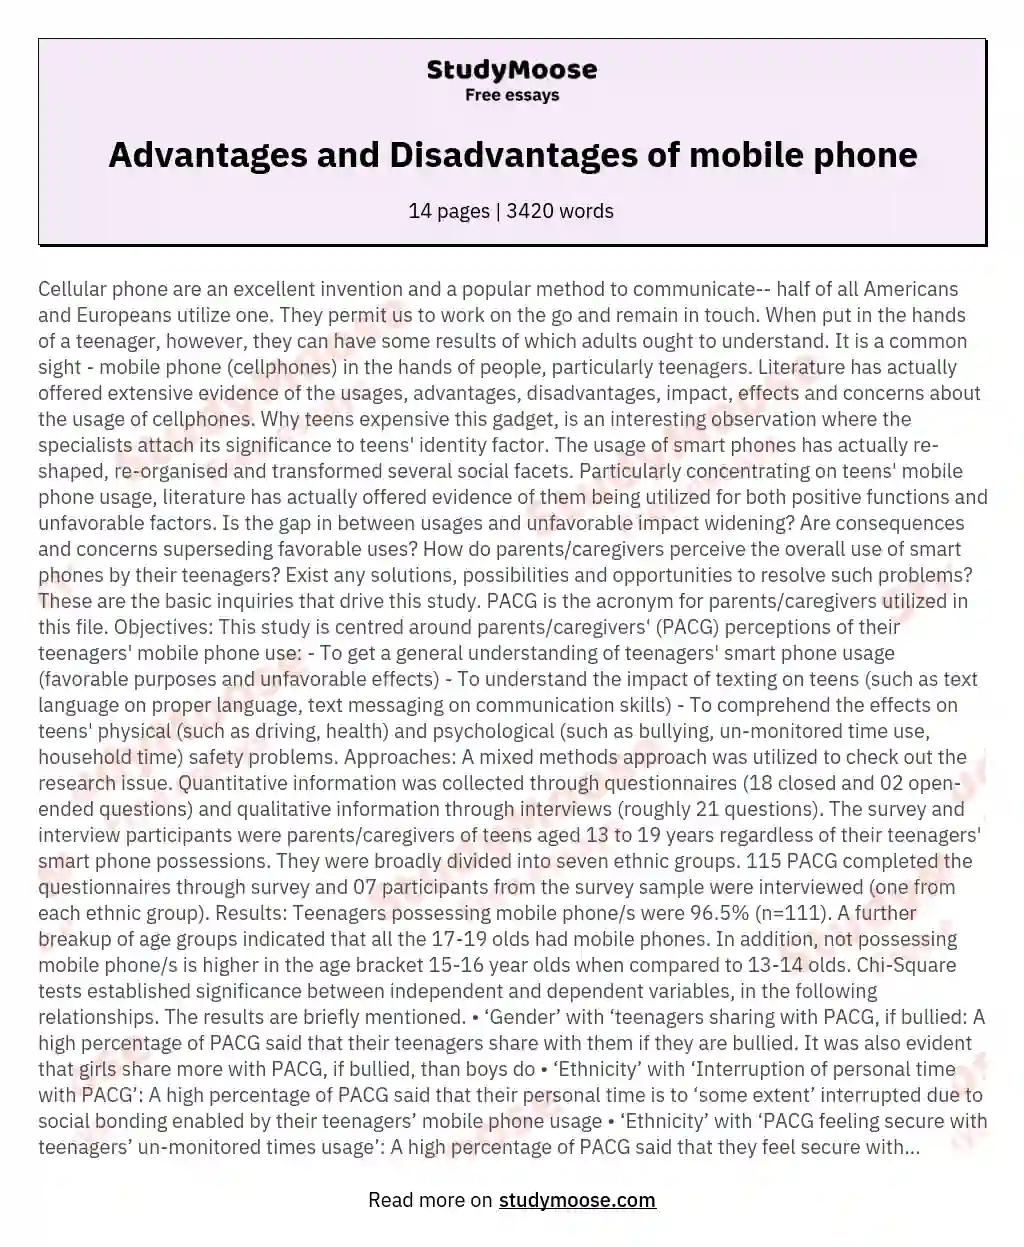 Advantages and Disadvantages of mobile phone essay